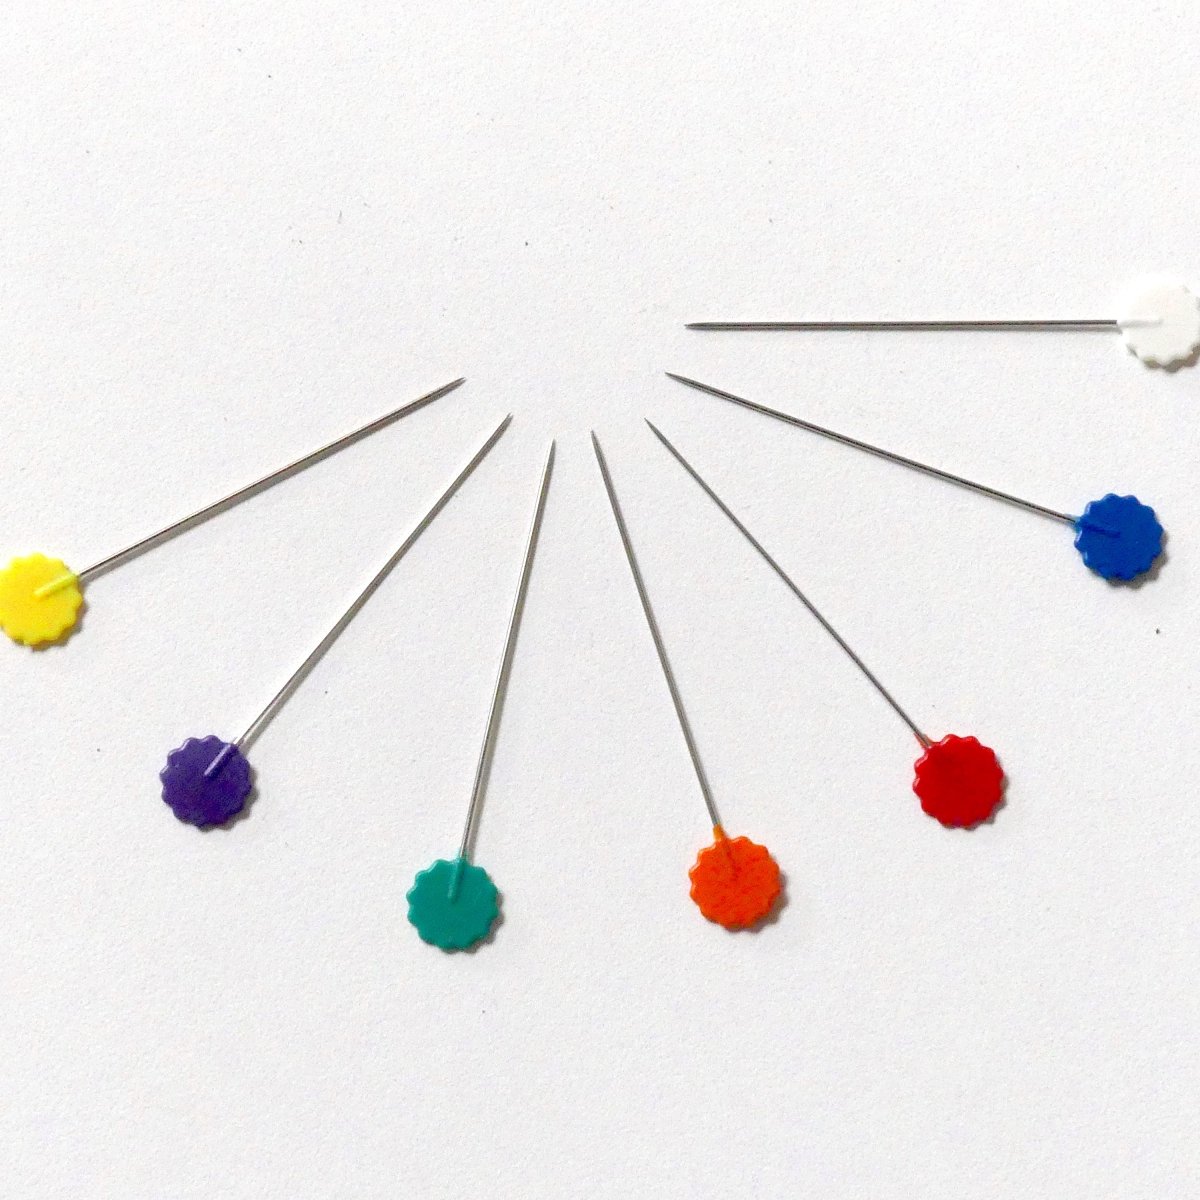 Long Flower Pins showing the seven colors that come in the box.